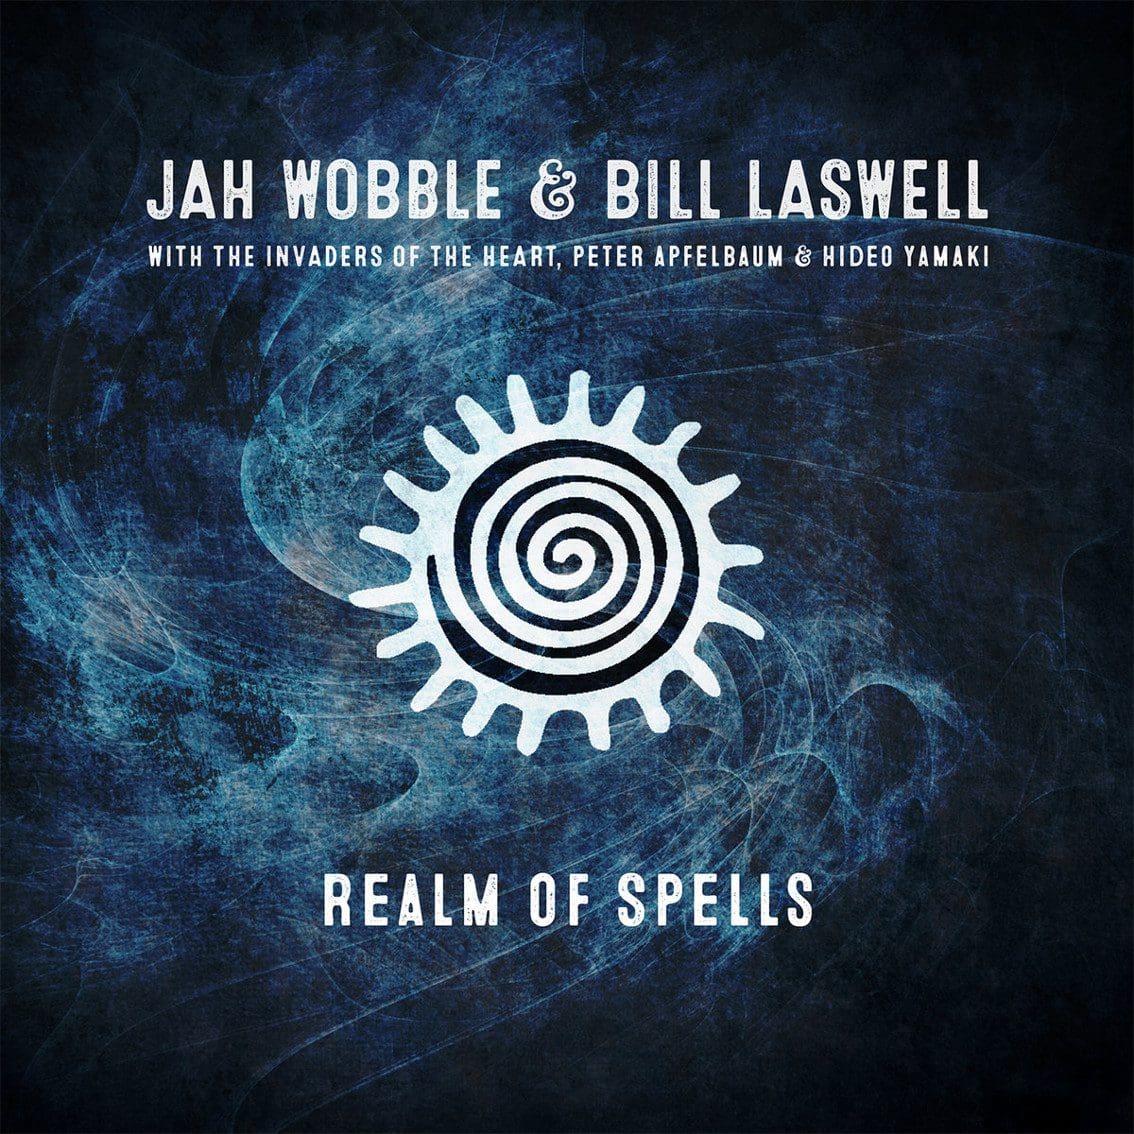 Jah Wobble & Bill Laswell announce new album: 'Realm Of Spells'